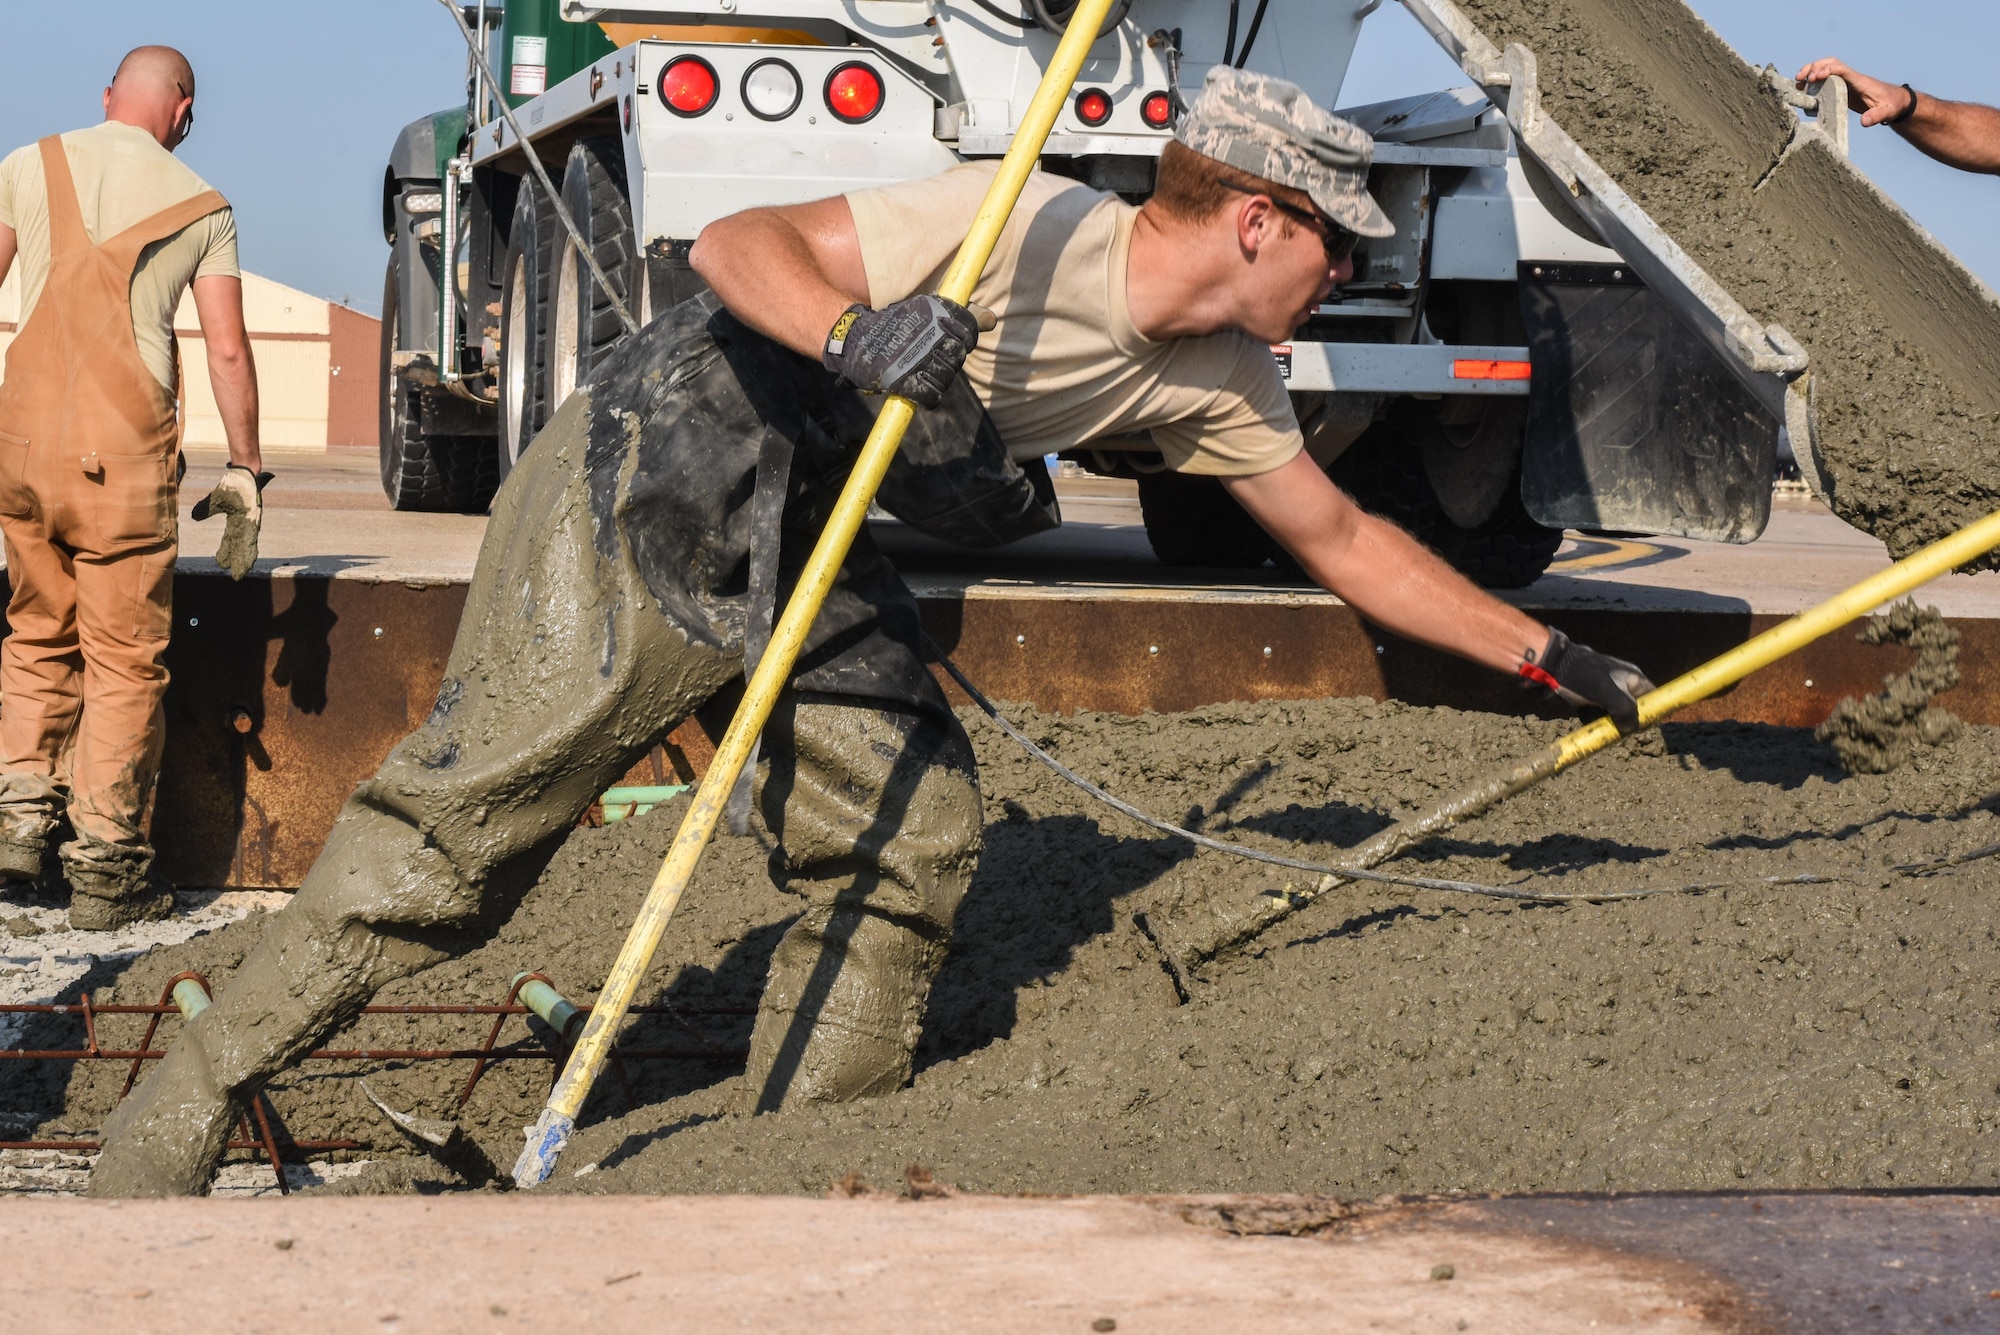 Staff Sgt. Zachary Aronin, assigned to the 2nd Civil Engineer Squadron Dirt Boyz, use rakes and shovels to spread wet concrete throughout a slab being fixed at Barksdale Air Force Base, La., July 18, 2017. The concrete replaced was over 35 years old. (U.S. Air Force Photo/Airman 1st Class Sydney Bennett)